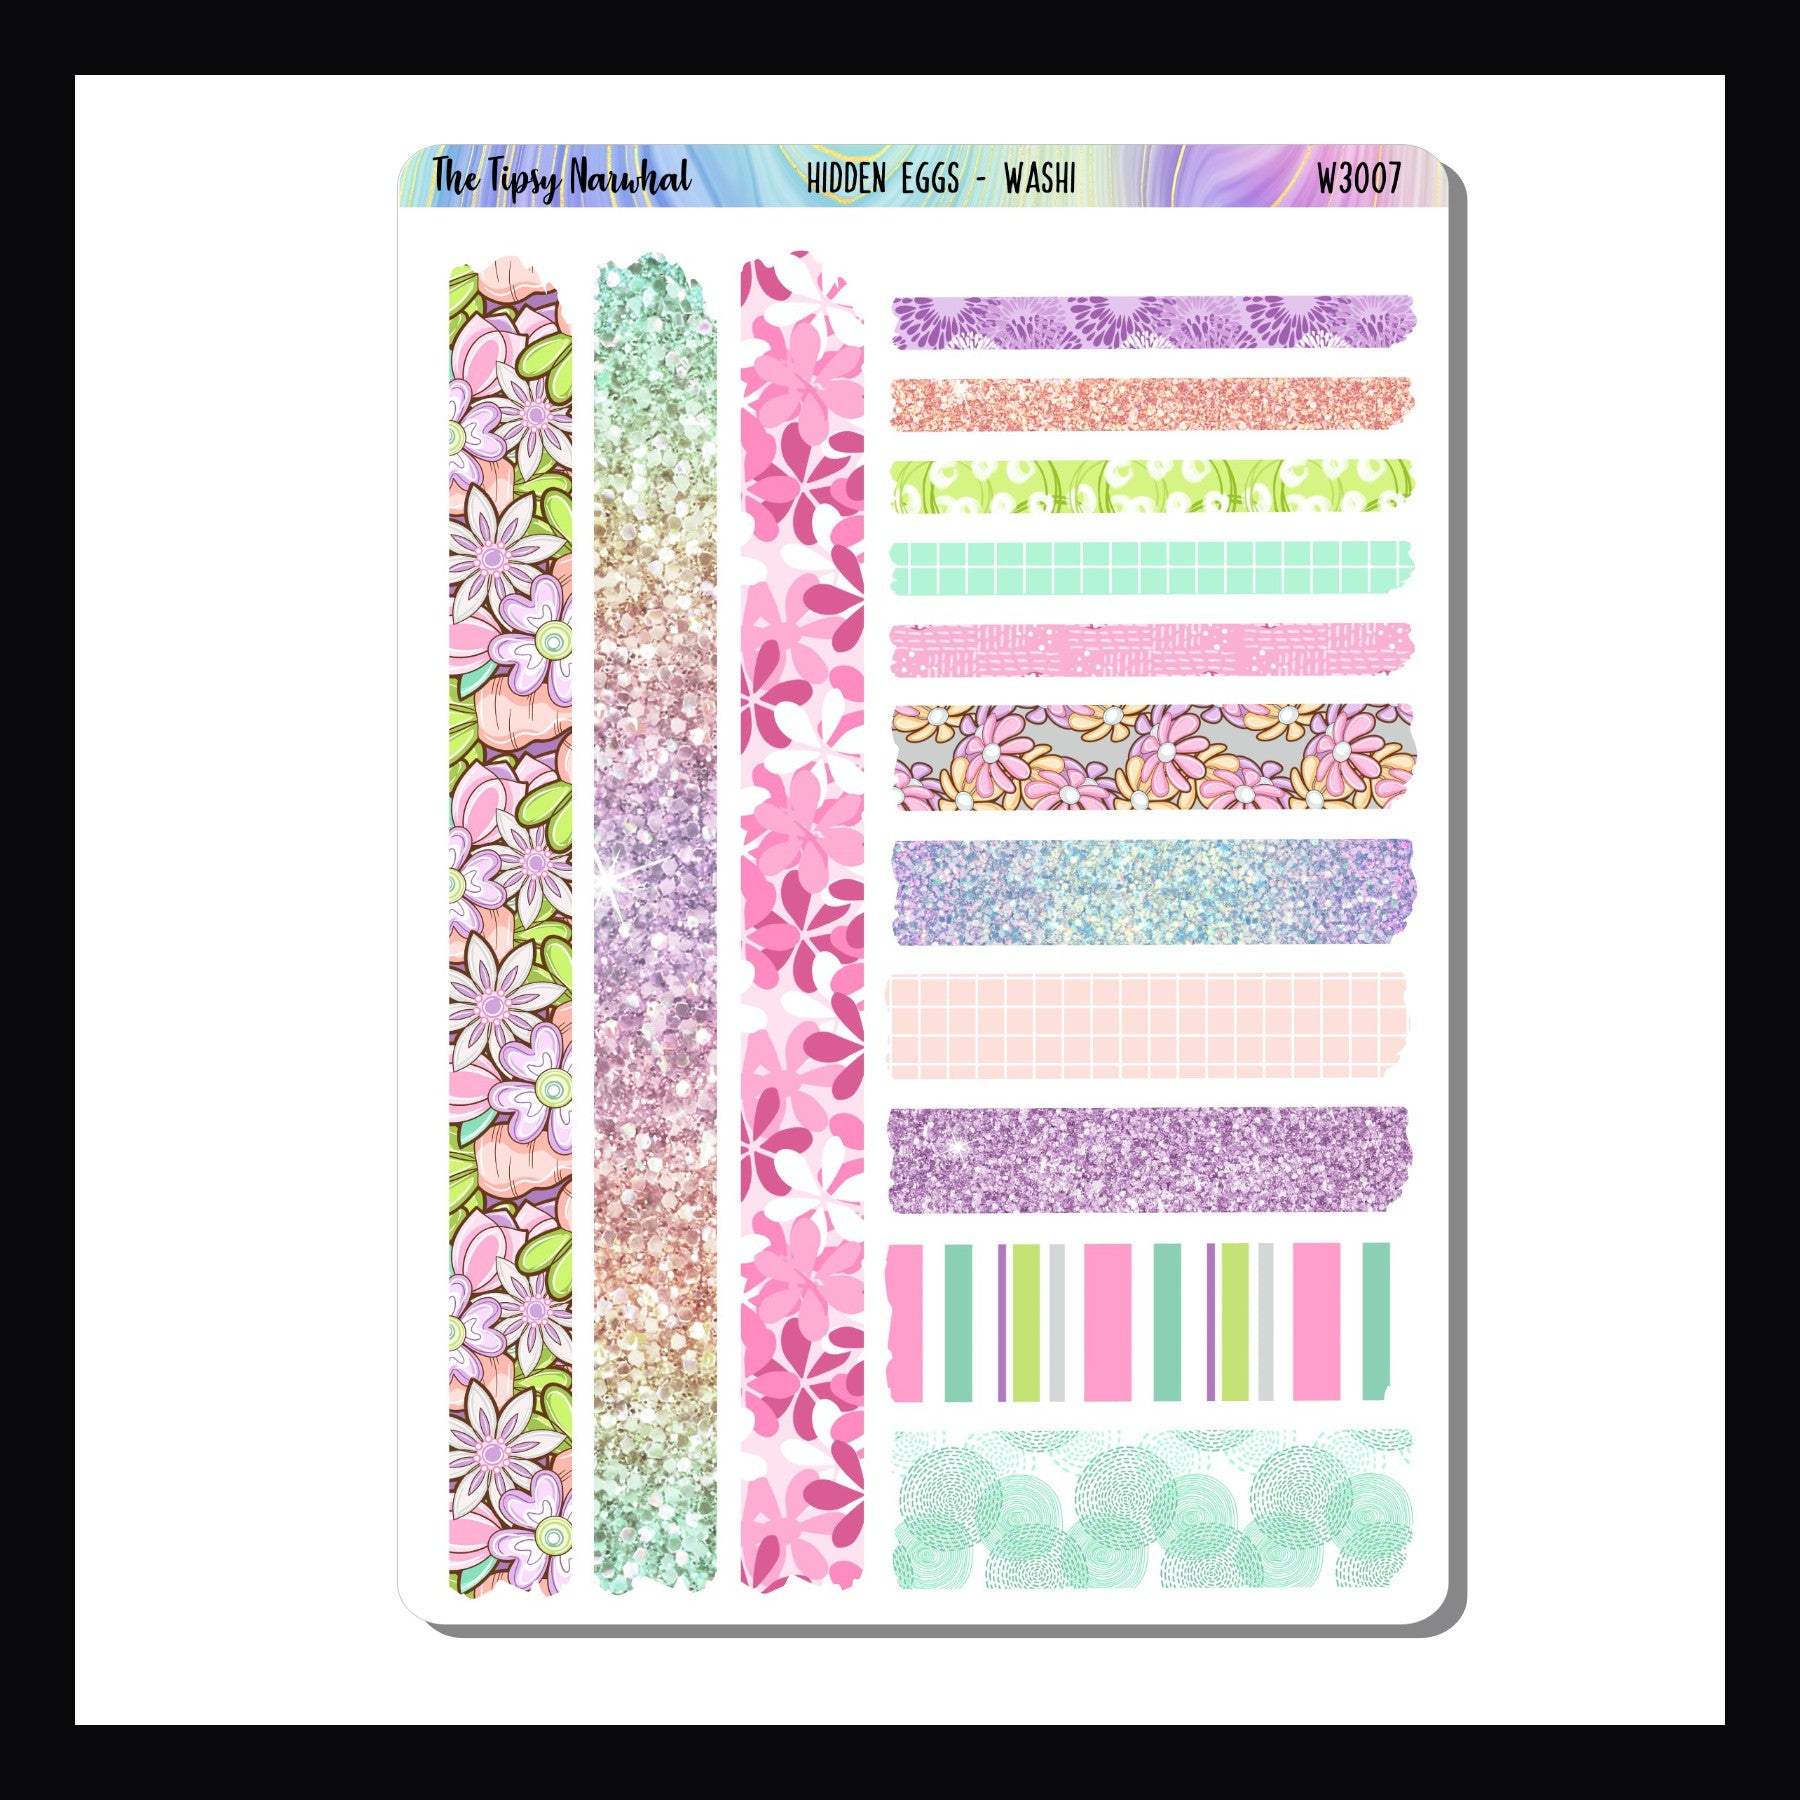 Hidden Eggs Washi Sheet features 14 strips varying sizes of washi stickers.  This selection of washi stickers matches the Hidden Eggs sticker kits. 